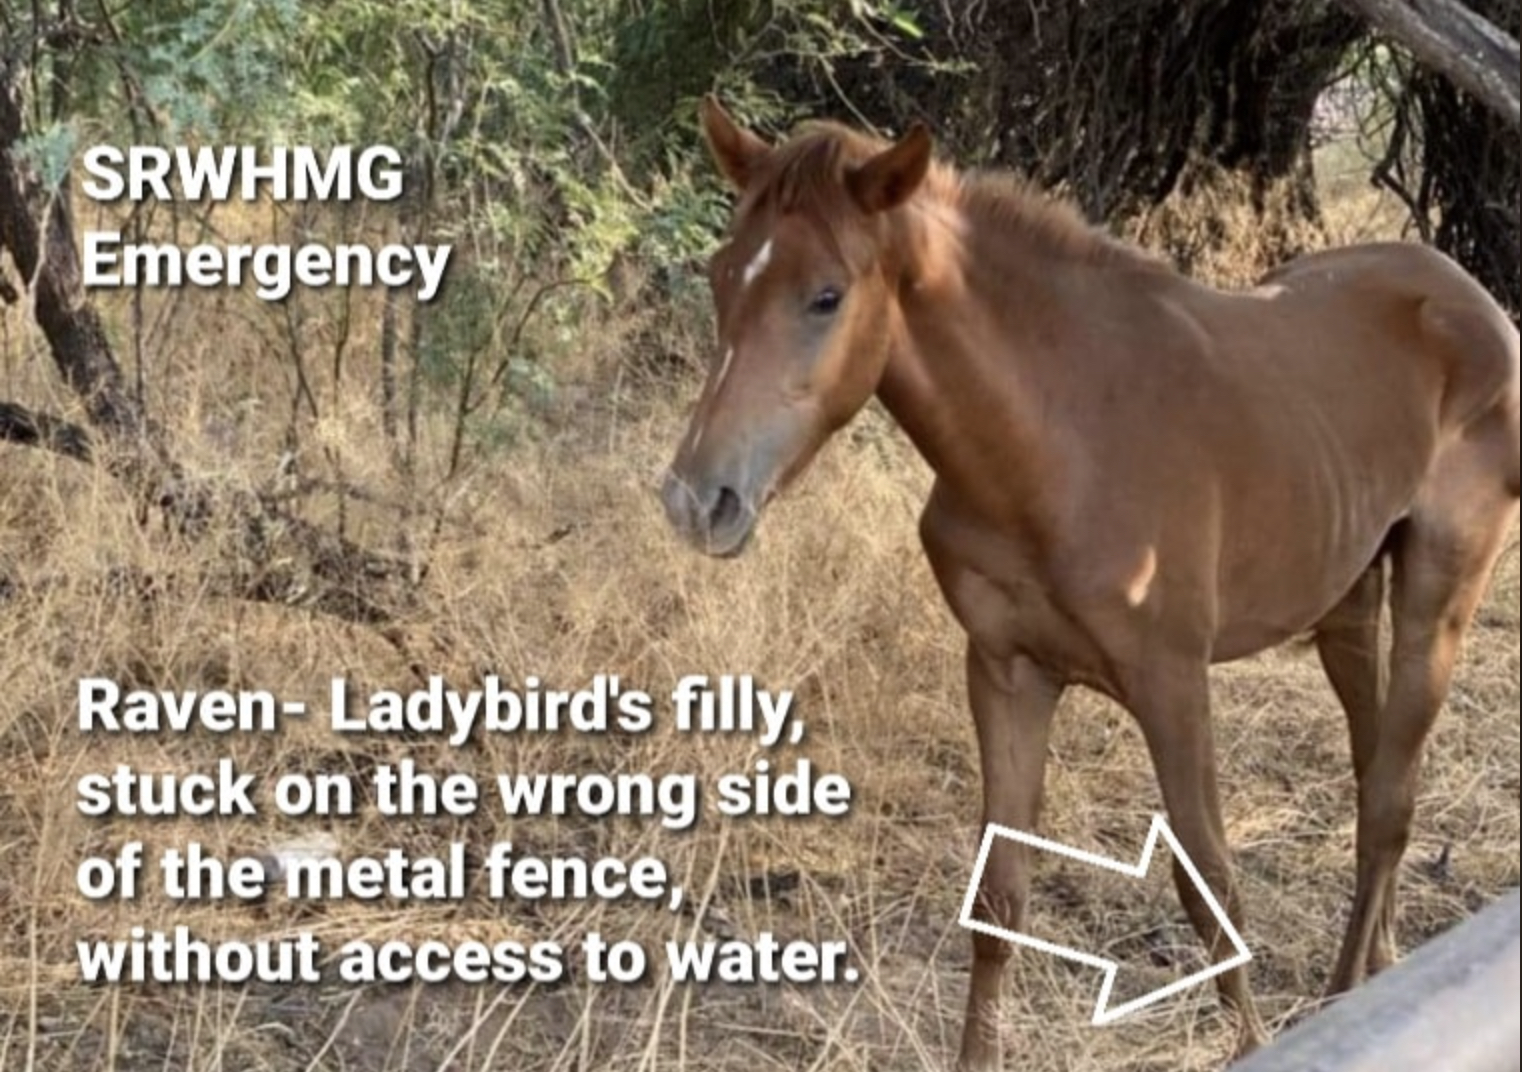 We received a call on our hotline about a horse on the wrong side of the metal fence, yesterday afternoon.